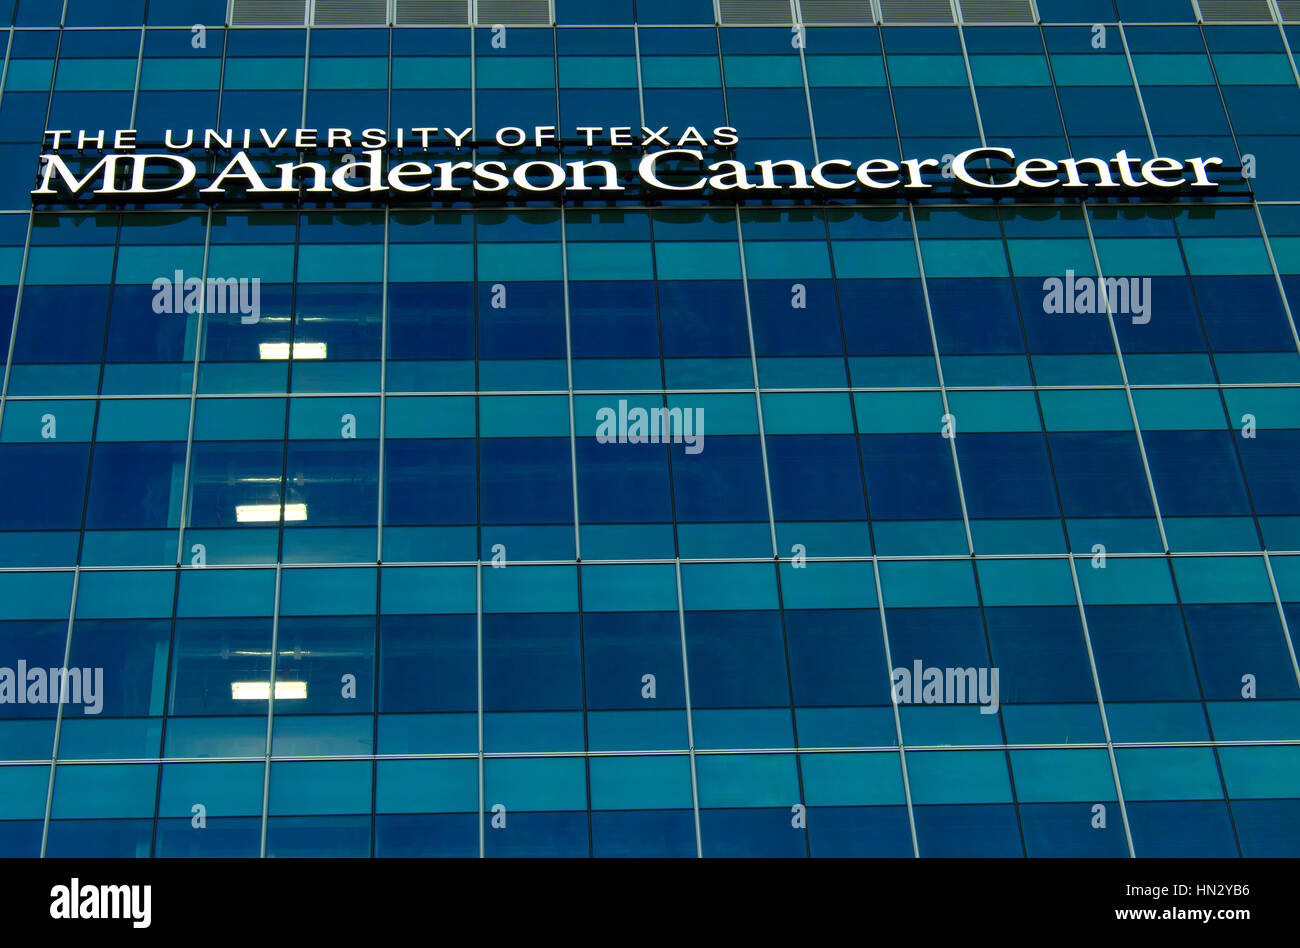 Houston, USA - July, 2015: Logo of MD Anderson Cancer Center located in Houston, Texas by the University of Texas. Stock Photo